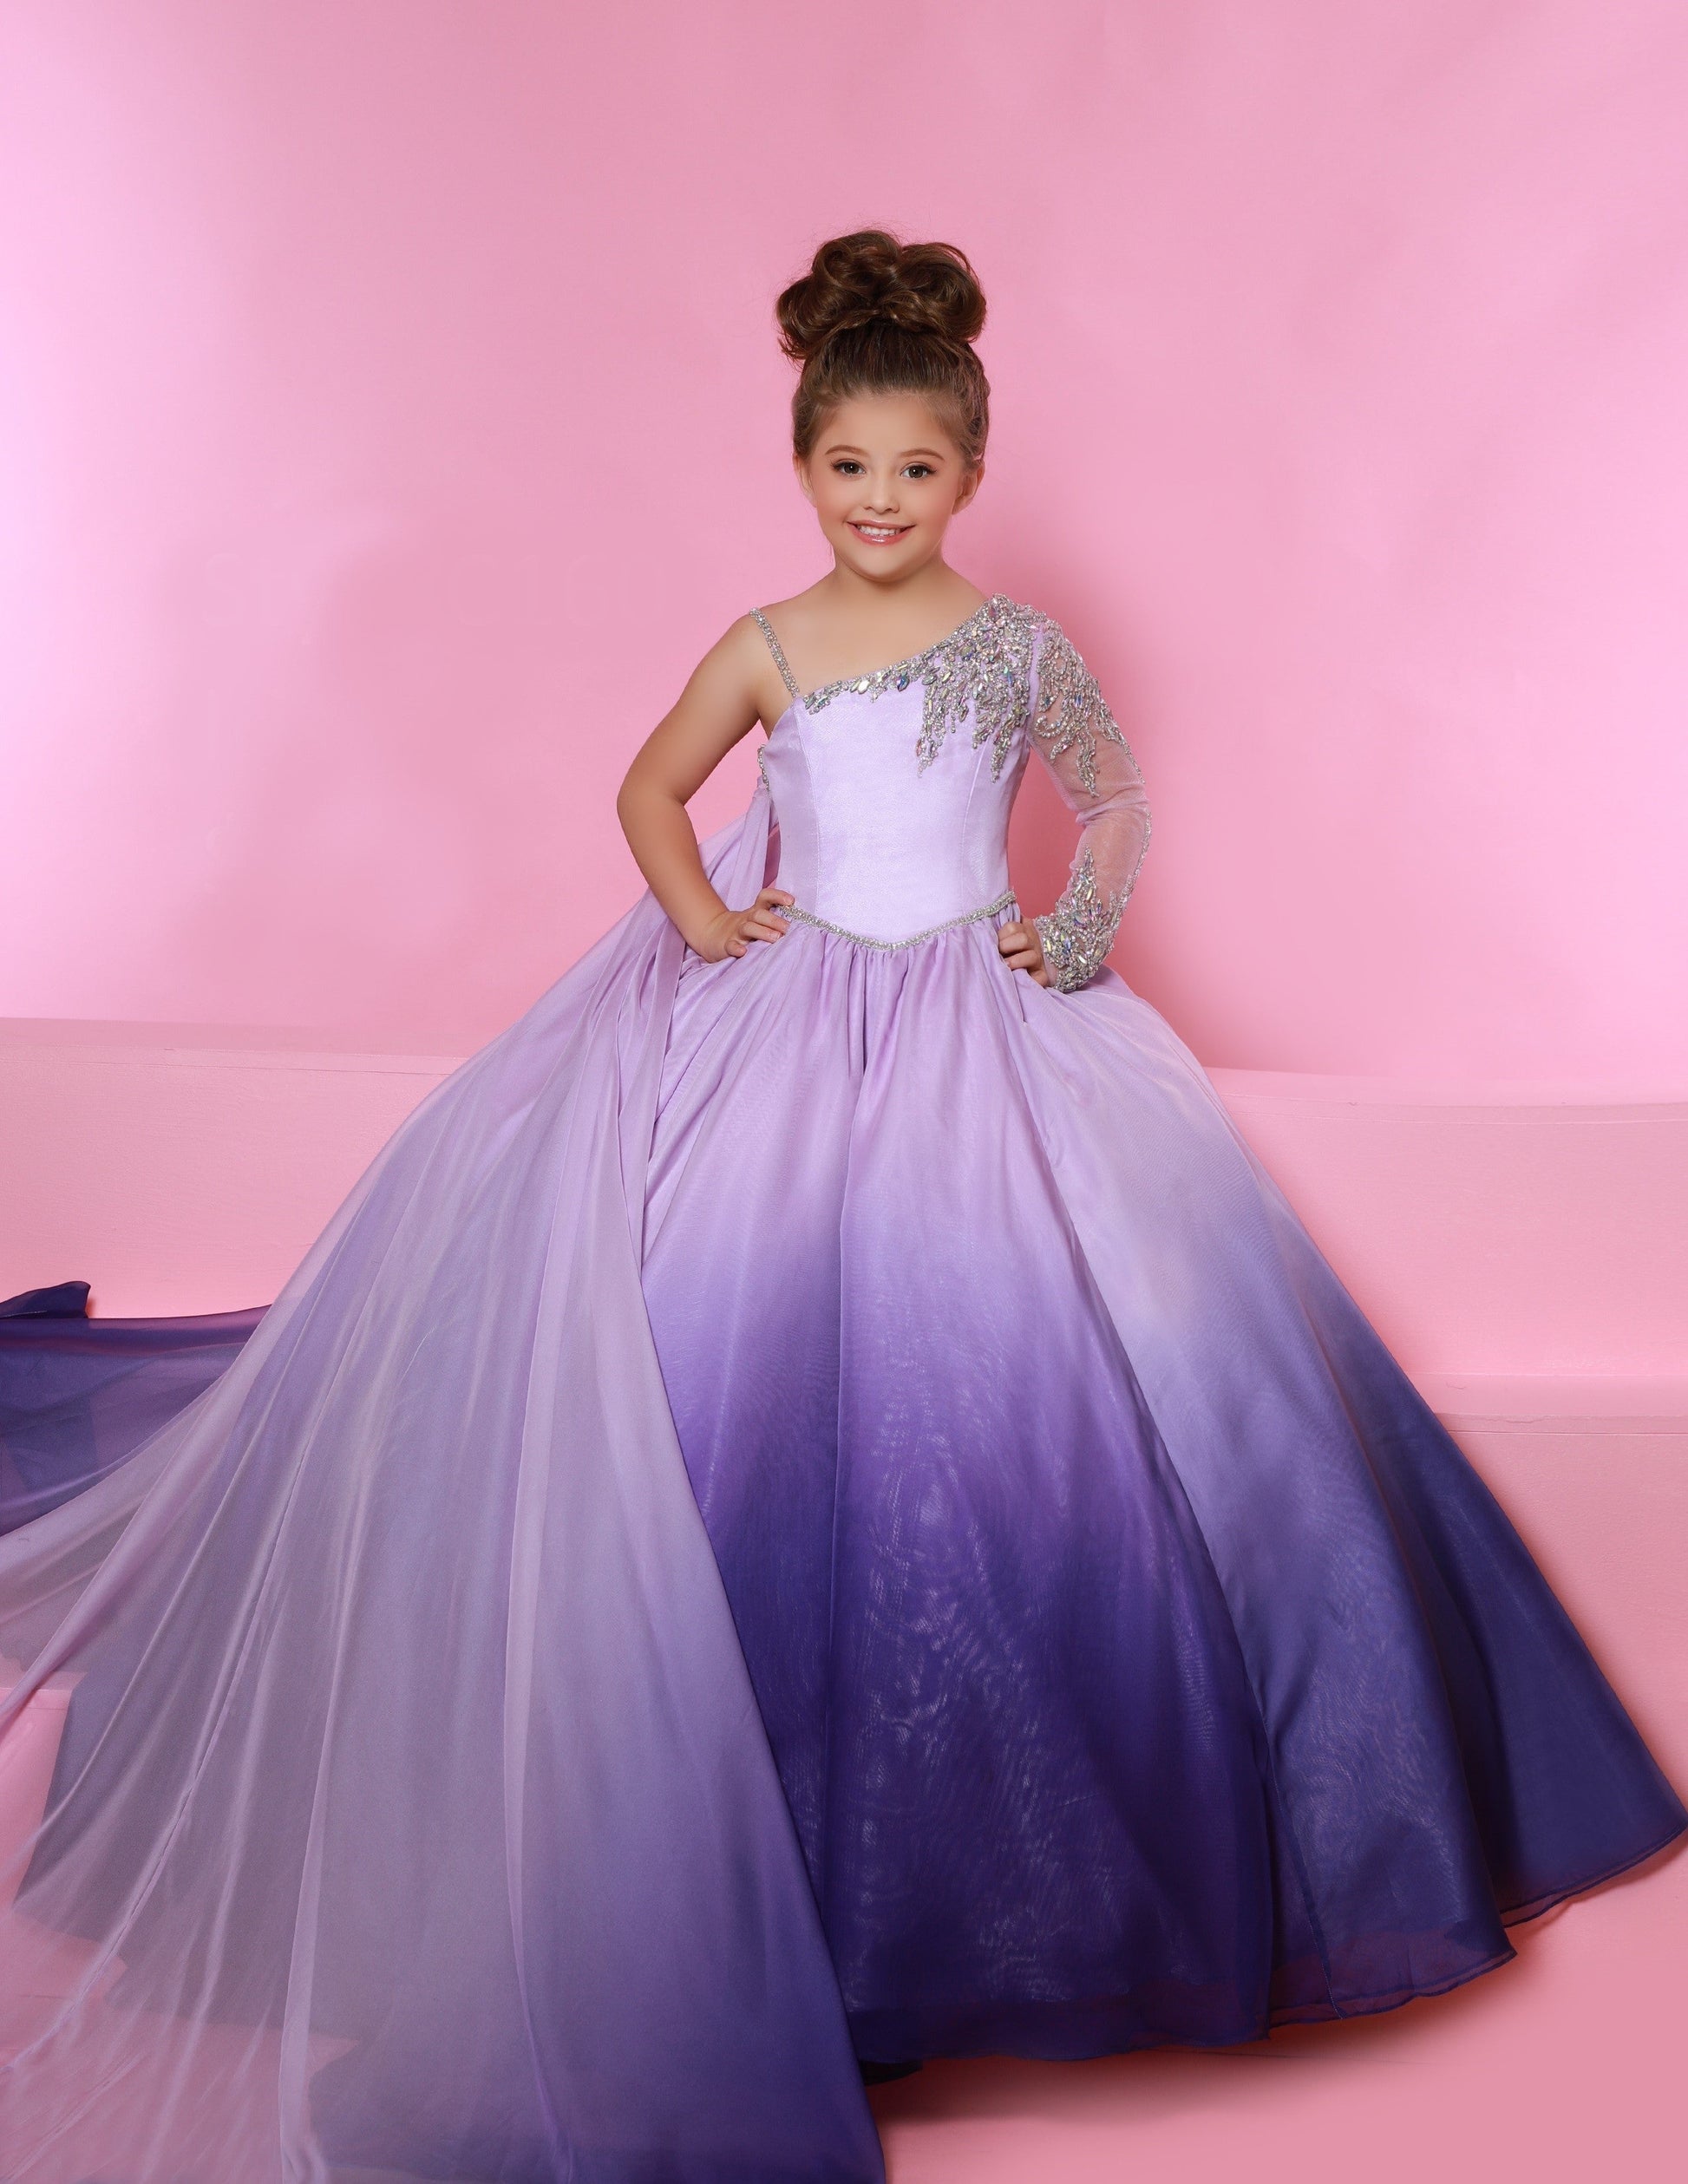 Sugar Kayne C160 is a Girls A Line Ballgown Pageant Dress. Featuring an Ombre Color shift as well as a flowing cape. One shoulder long sleeve with embellishments. embellished waist.  Colors:  Sunset, Iris  Sizes:  2-16  (Sizes 2-6 do not have bust cups, Sizes 8-16 will have preteen size bust cups)